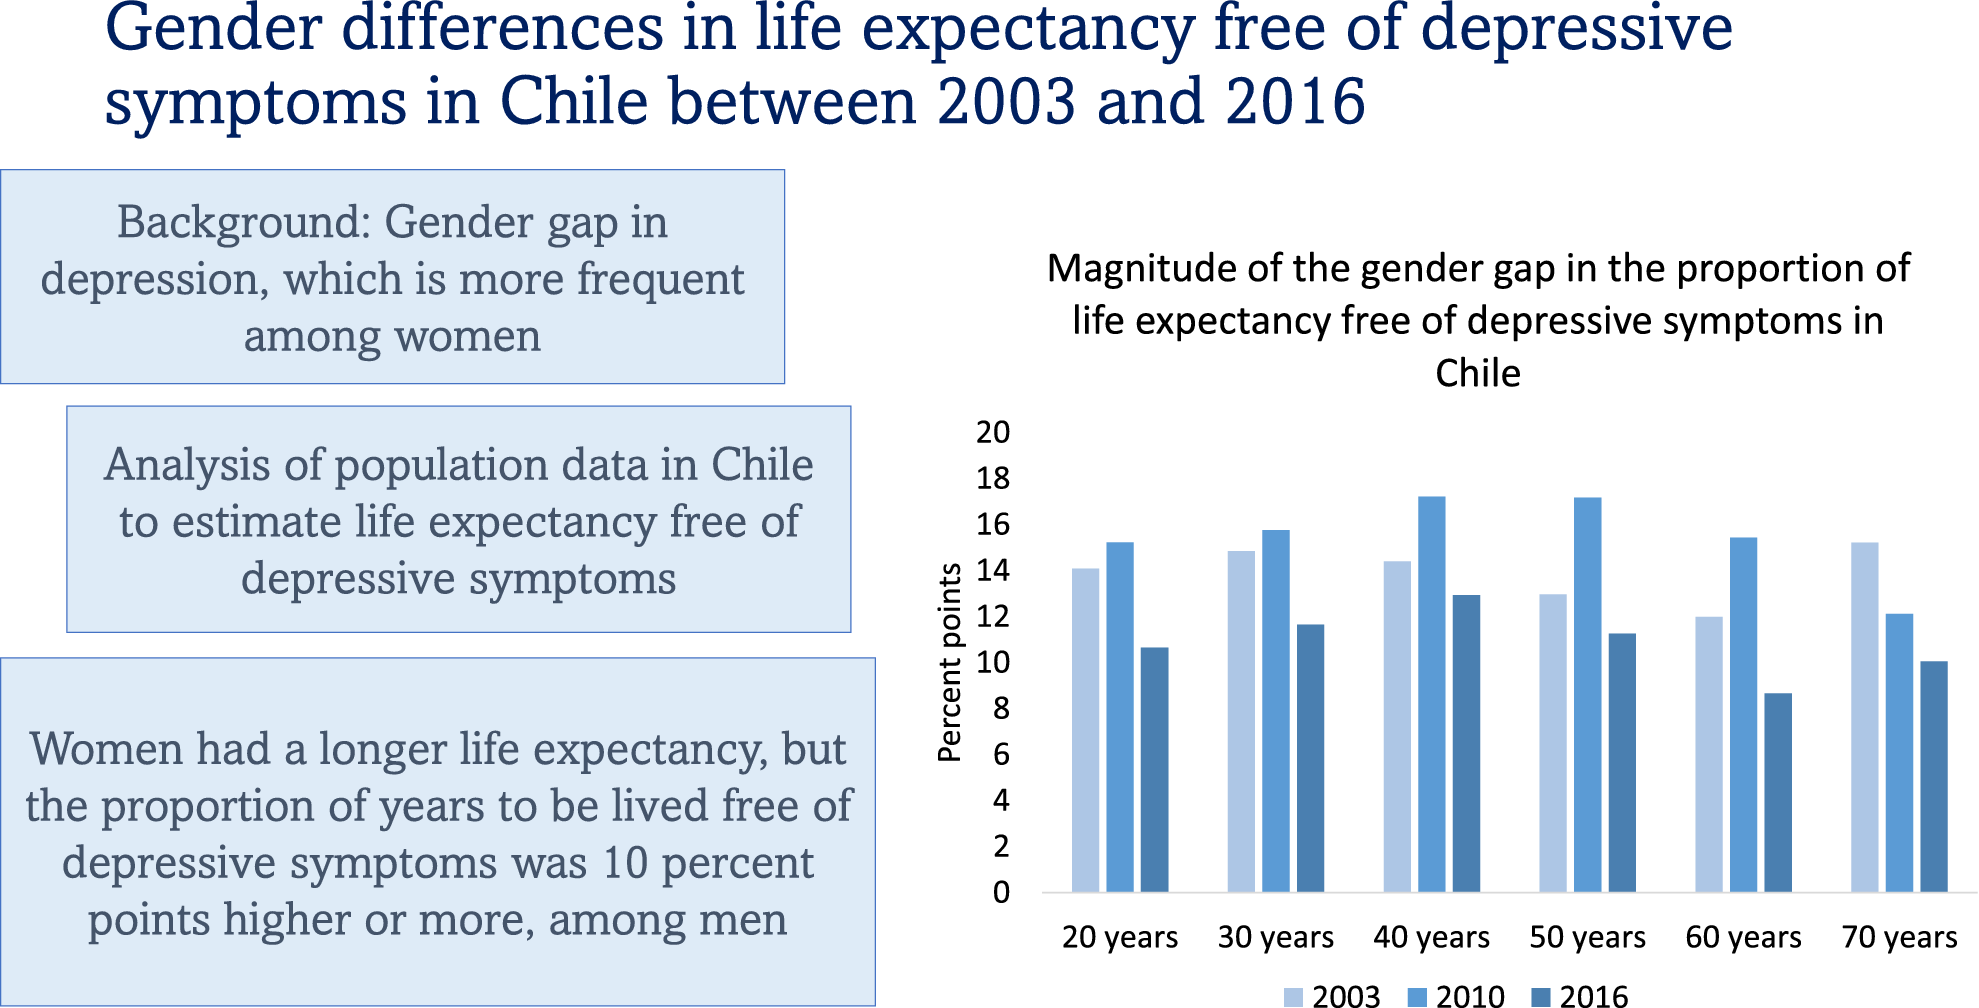 graphical abstract for Gender differences in life expectancy free of depressive symptoms in Chile between 2003 and 2016 - open in full screen